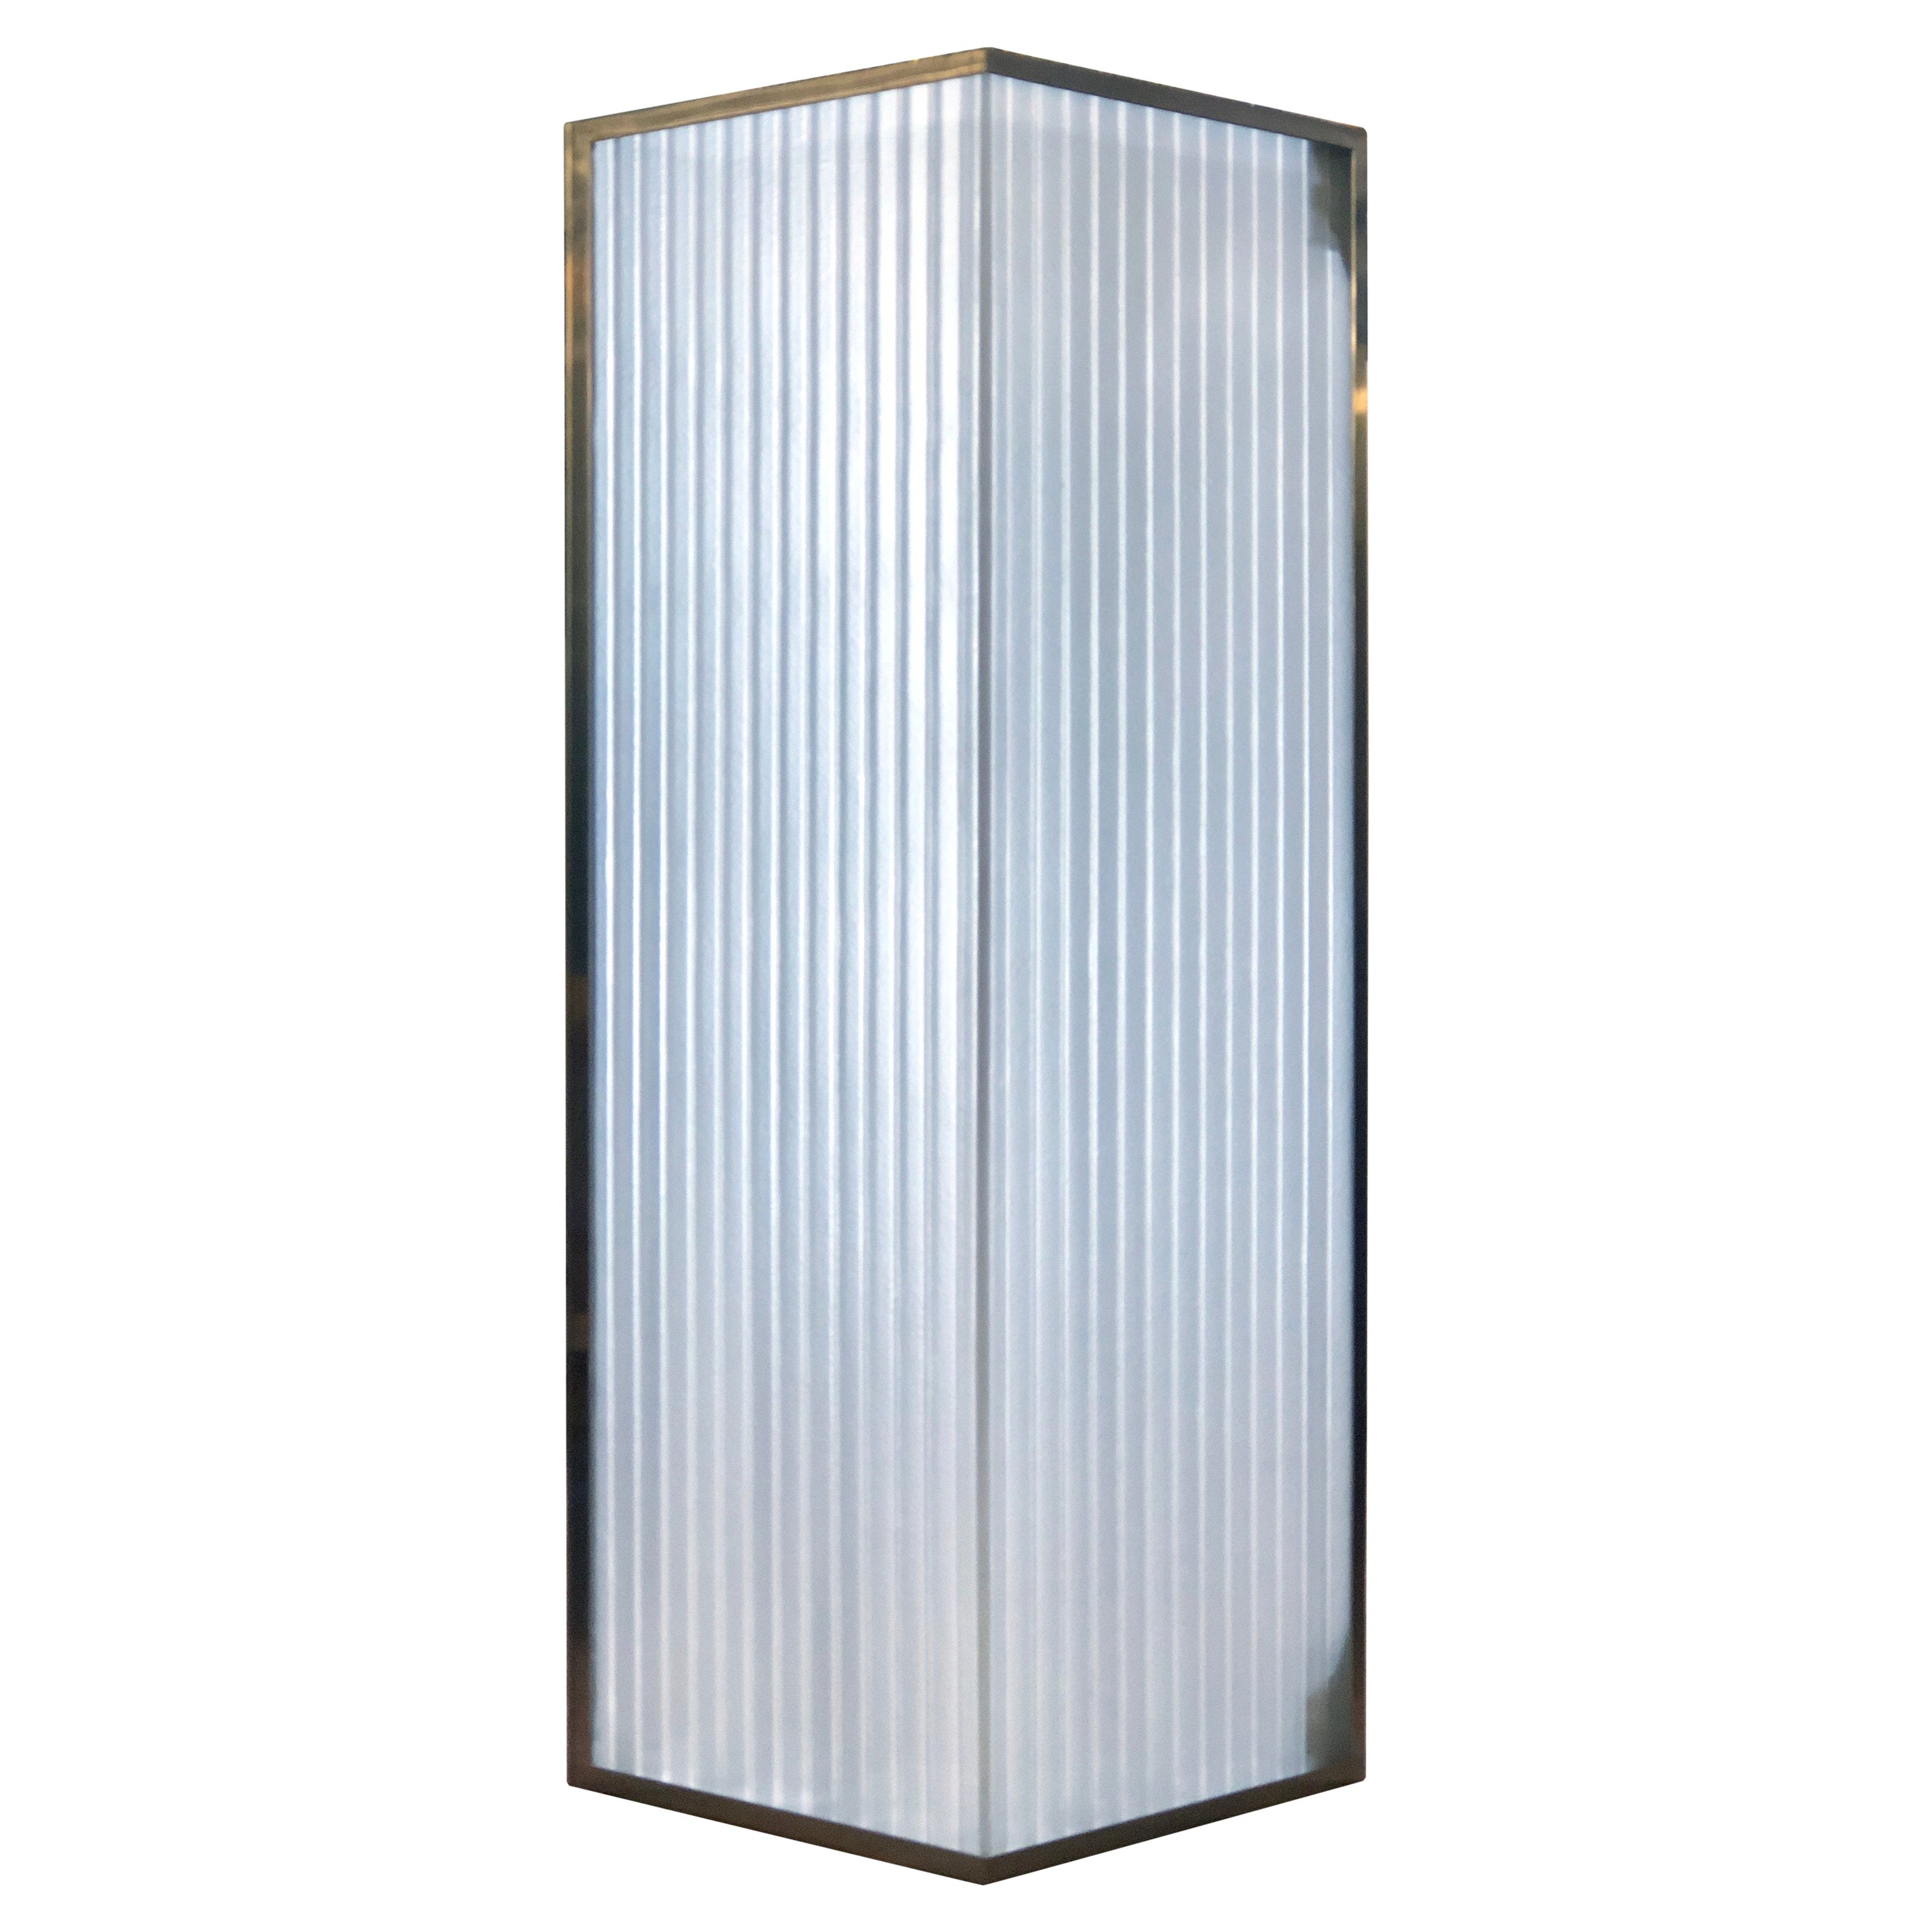 1990s Large Moveable Corrugated Translucent Glass Panel 90 Degree Angle Frame For Sale